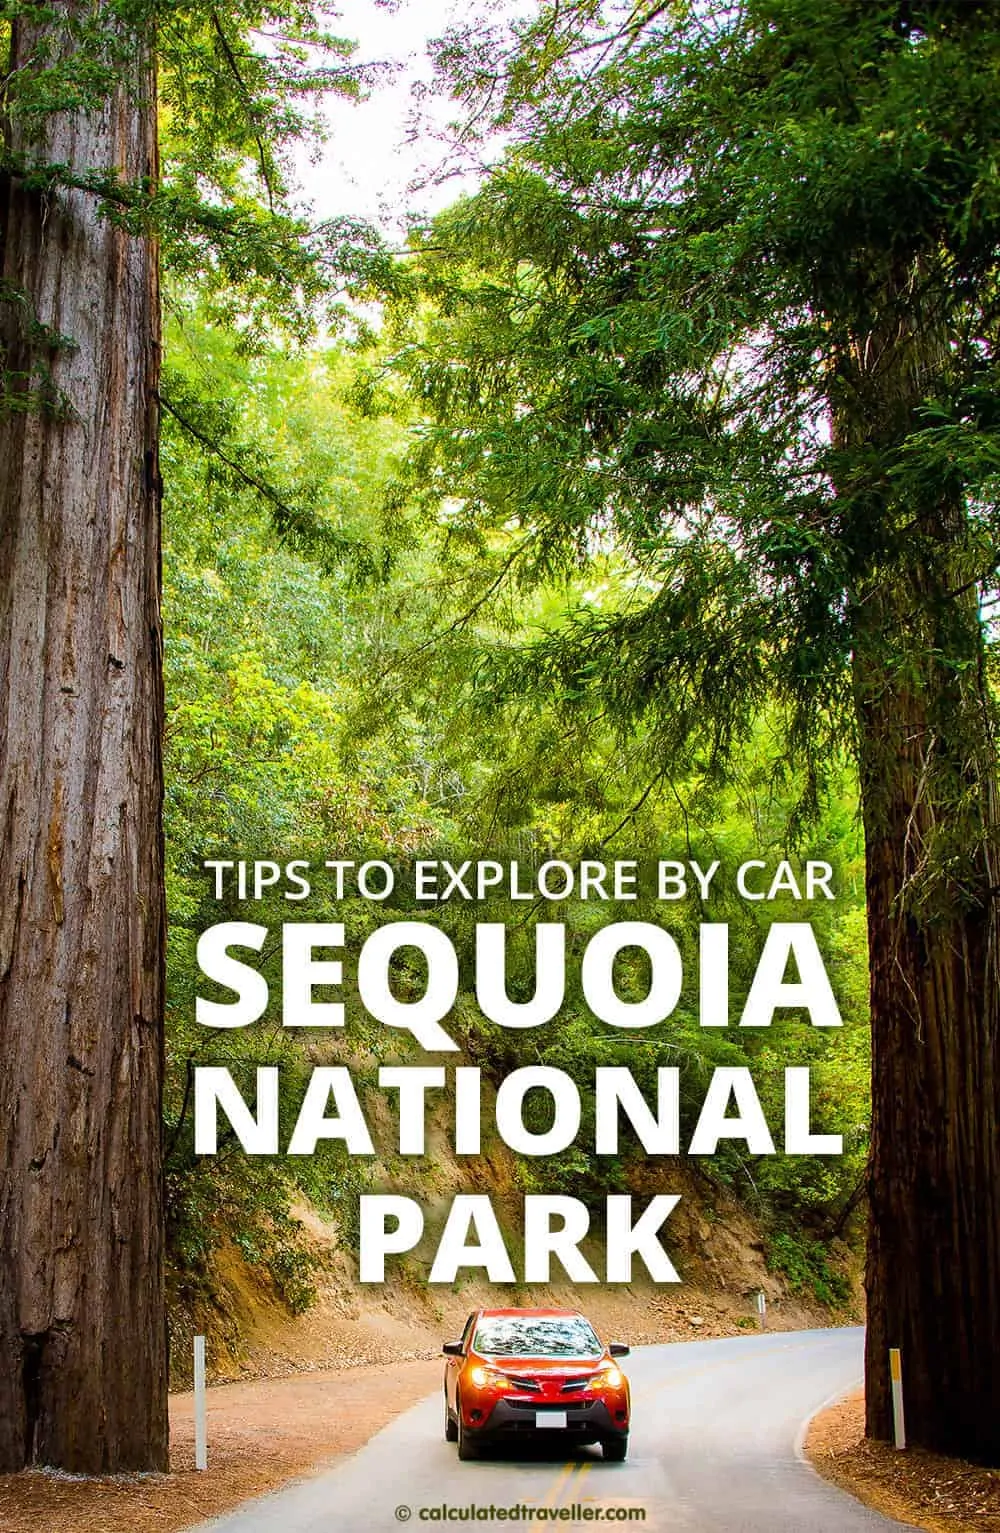 15 Tips for Exploring Sequoia National Park by Car - Calculated Traveller | #NationalPark #USA #Sequoia #road #trip #car